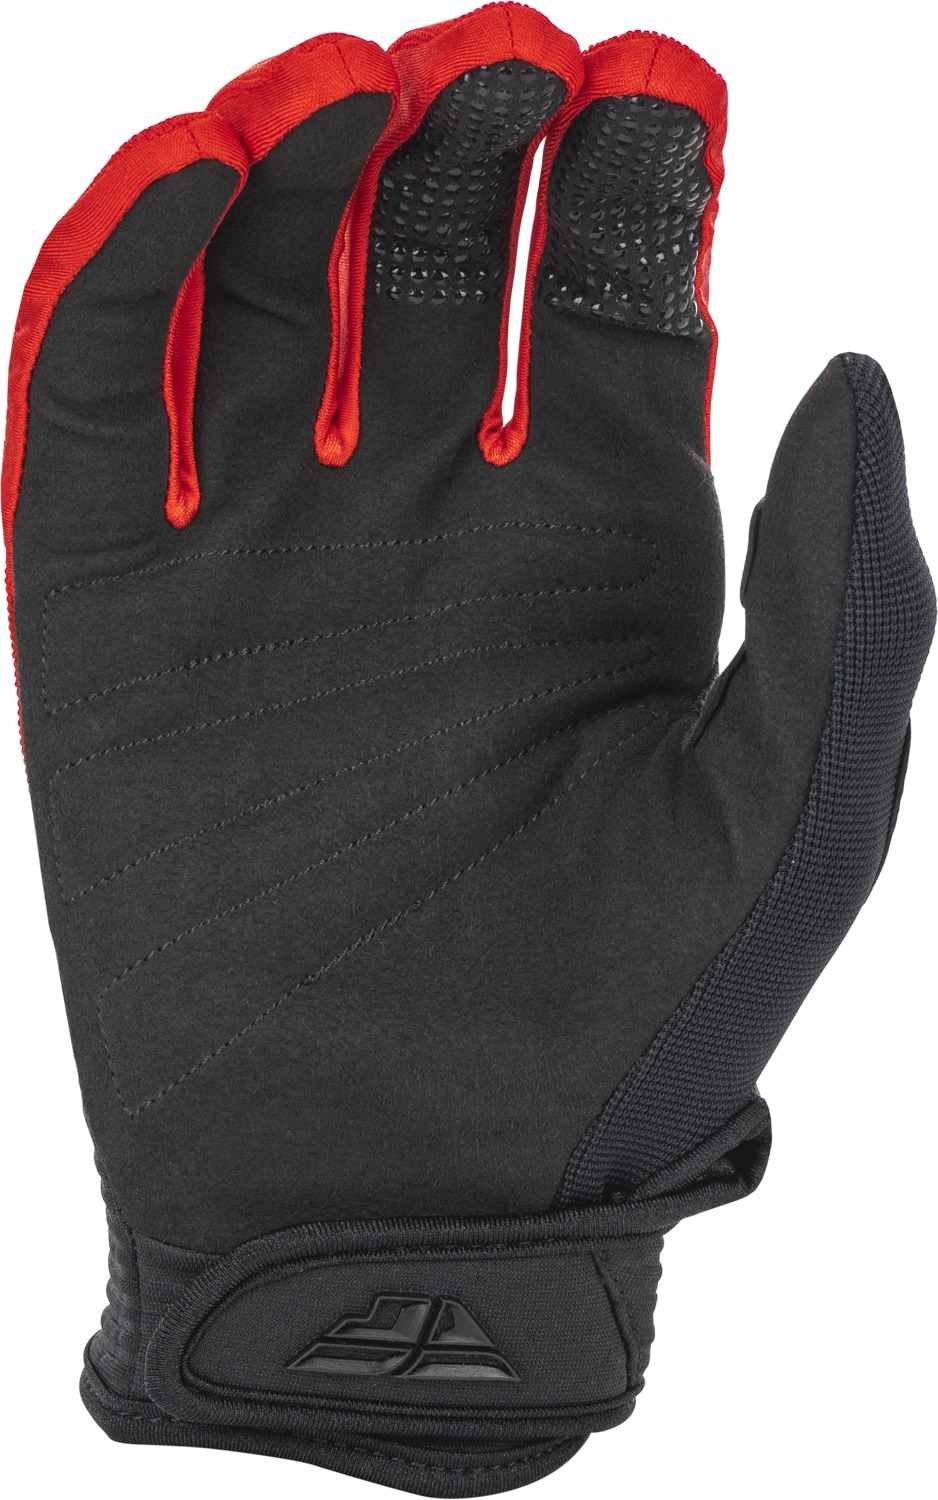 YOUTH F-16 GLOVES RED/BLACK